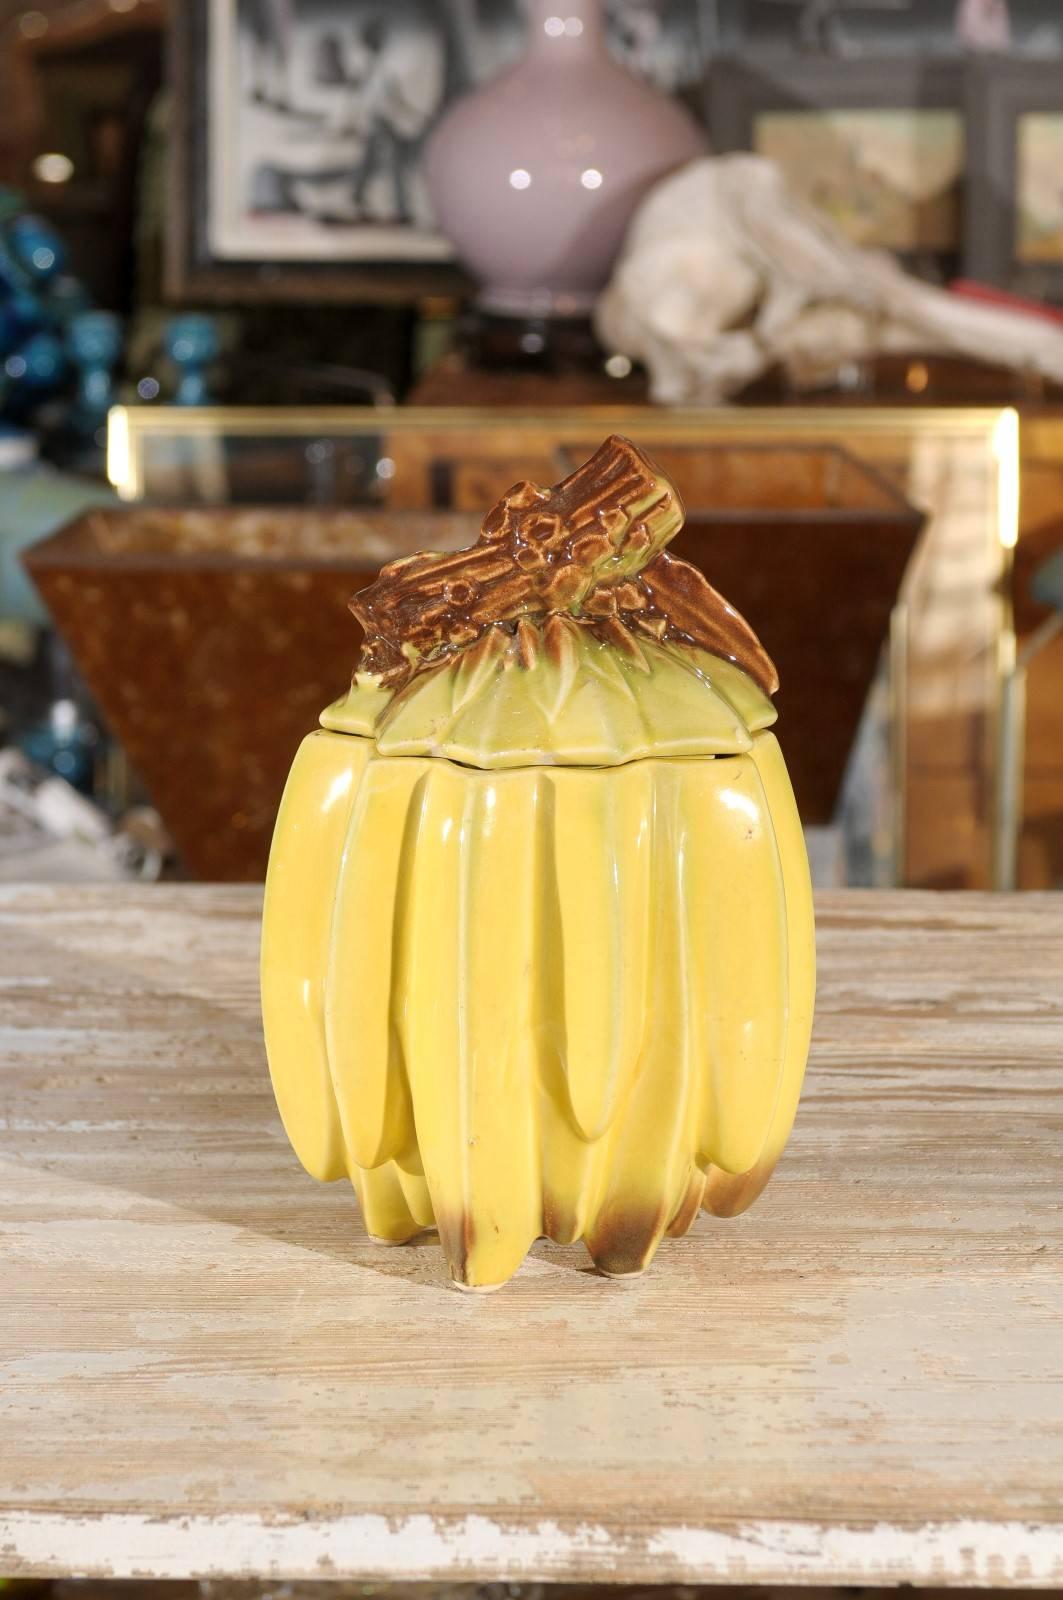 American mid-20th century yellow and brown ceramic container with removable lid in the shape of a bunch of bananas. Made by McCoy Pottery.